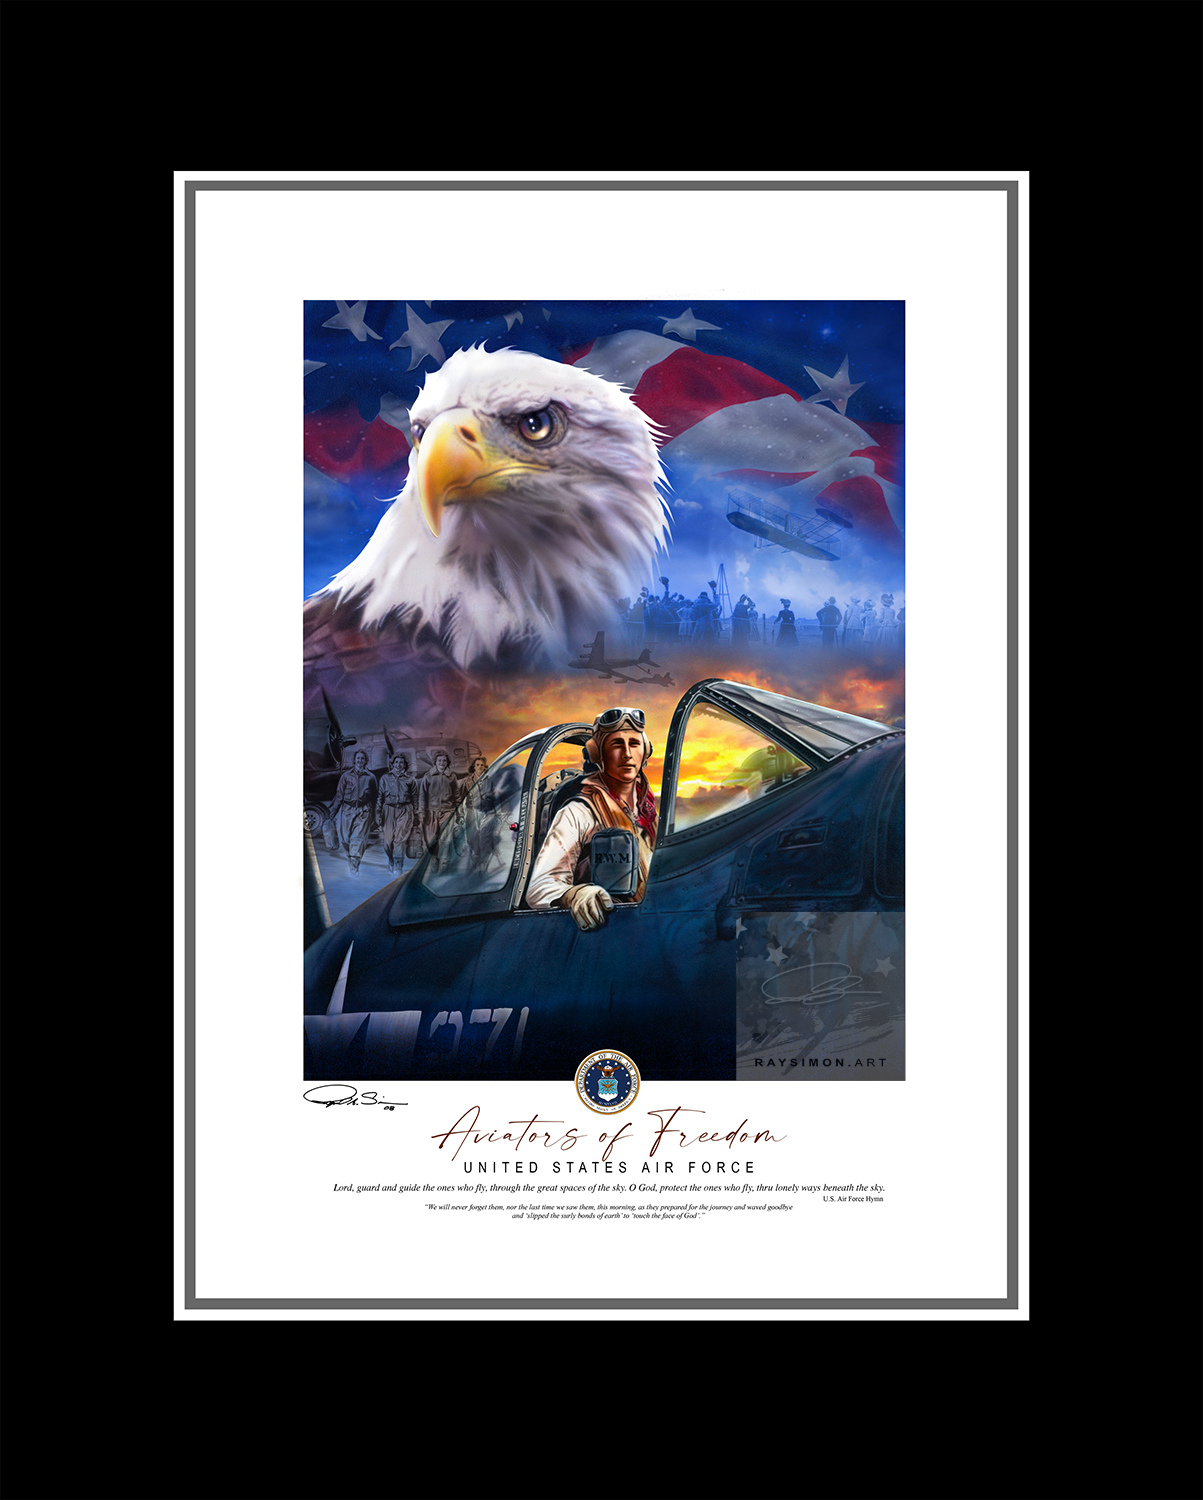 Air Force Painting - 'Aviators of Freedom'